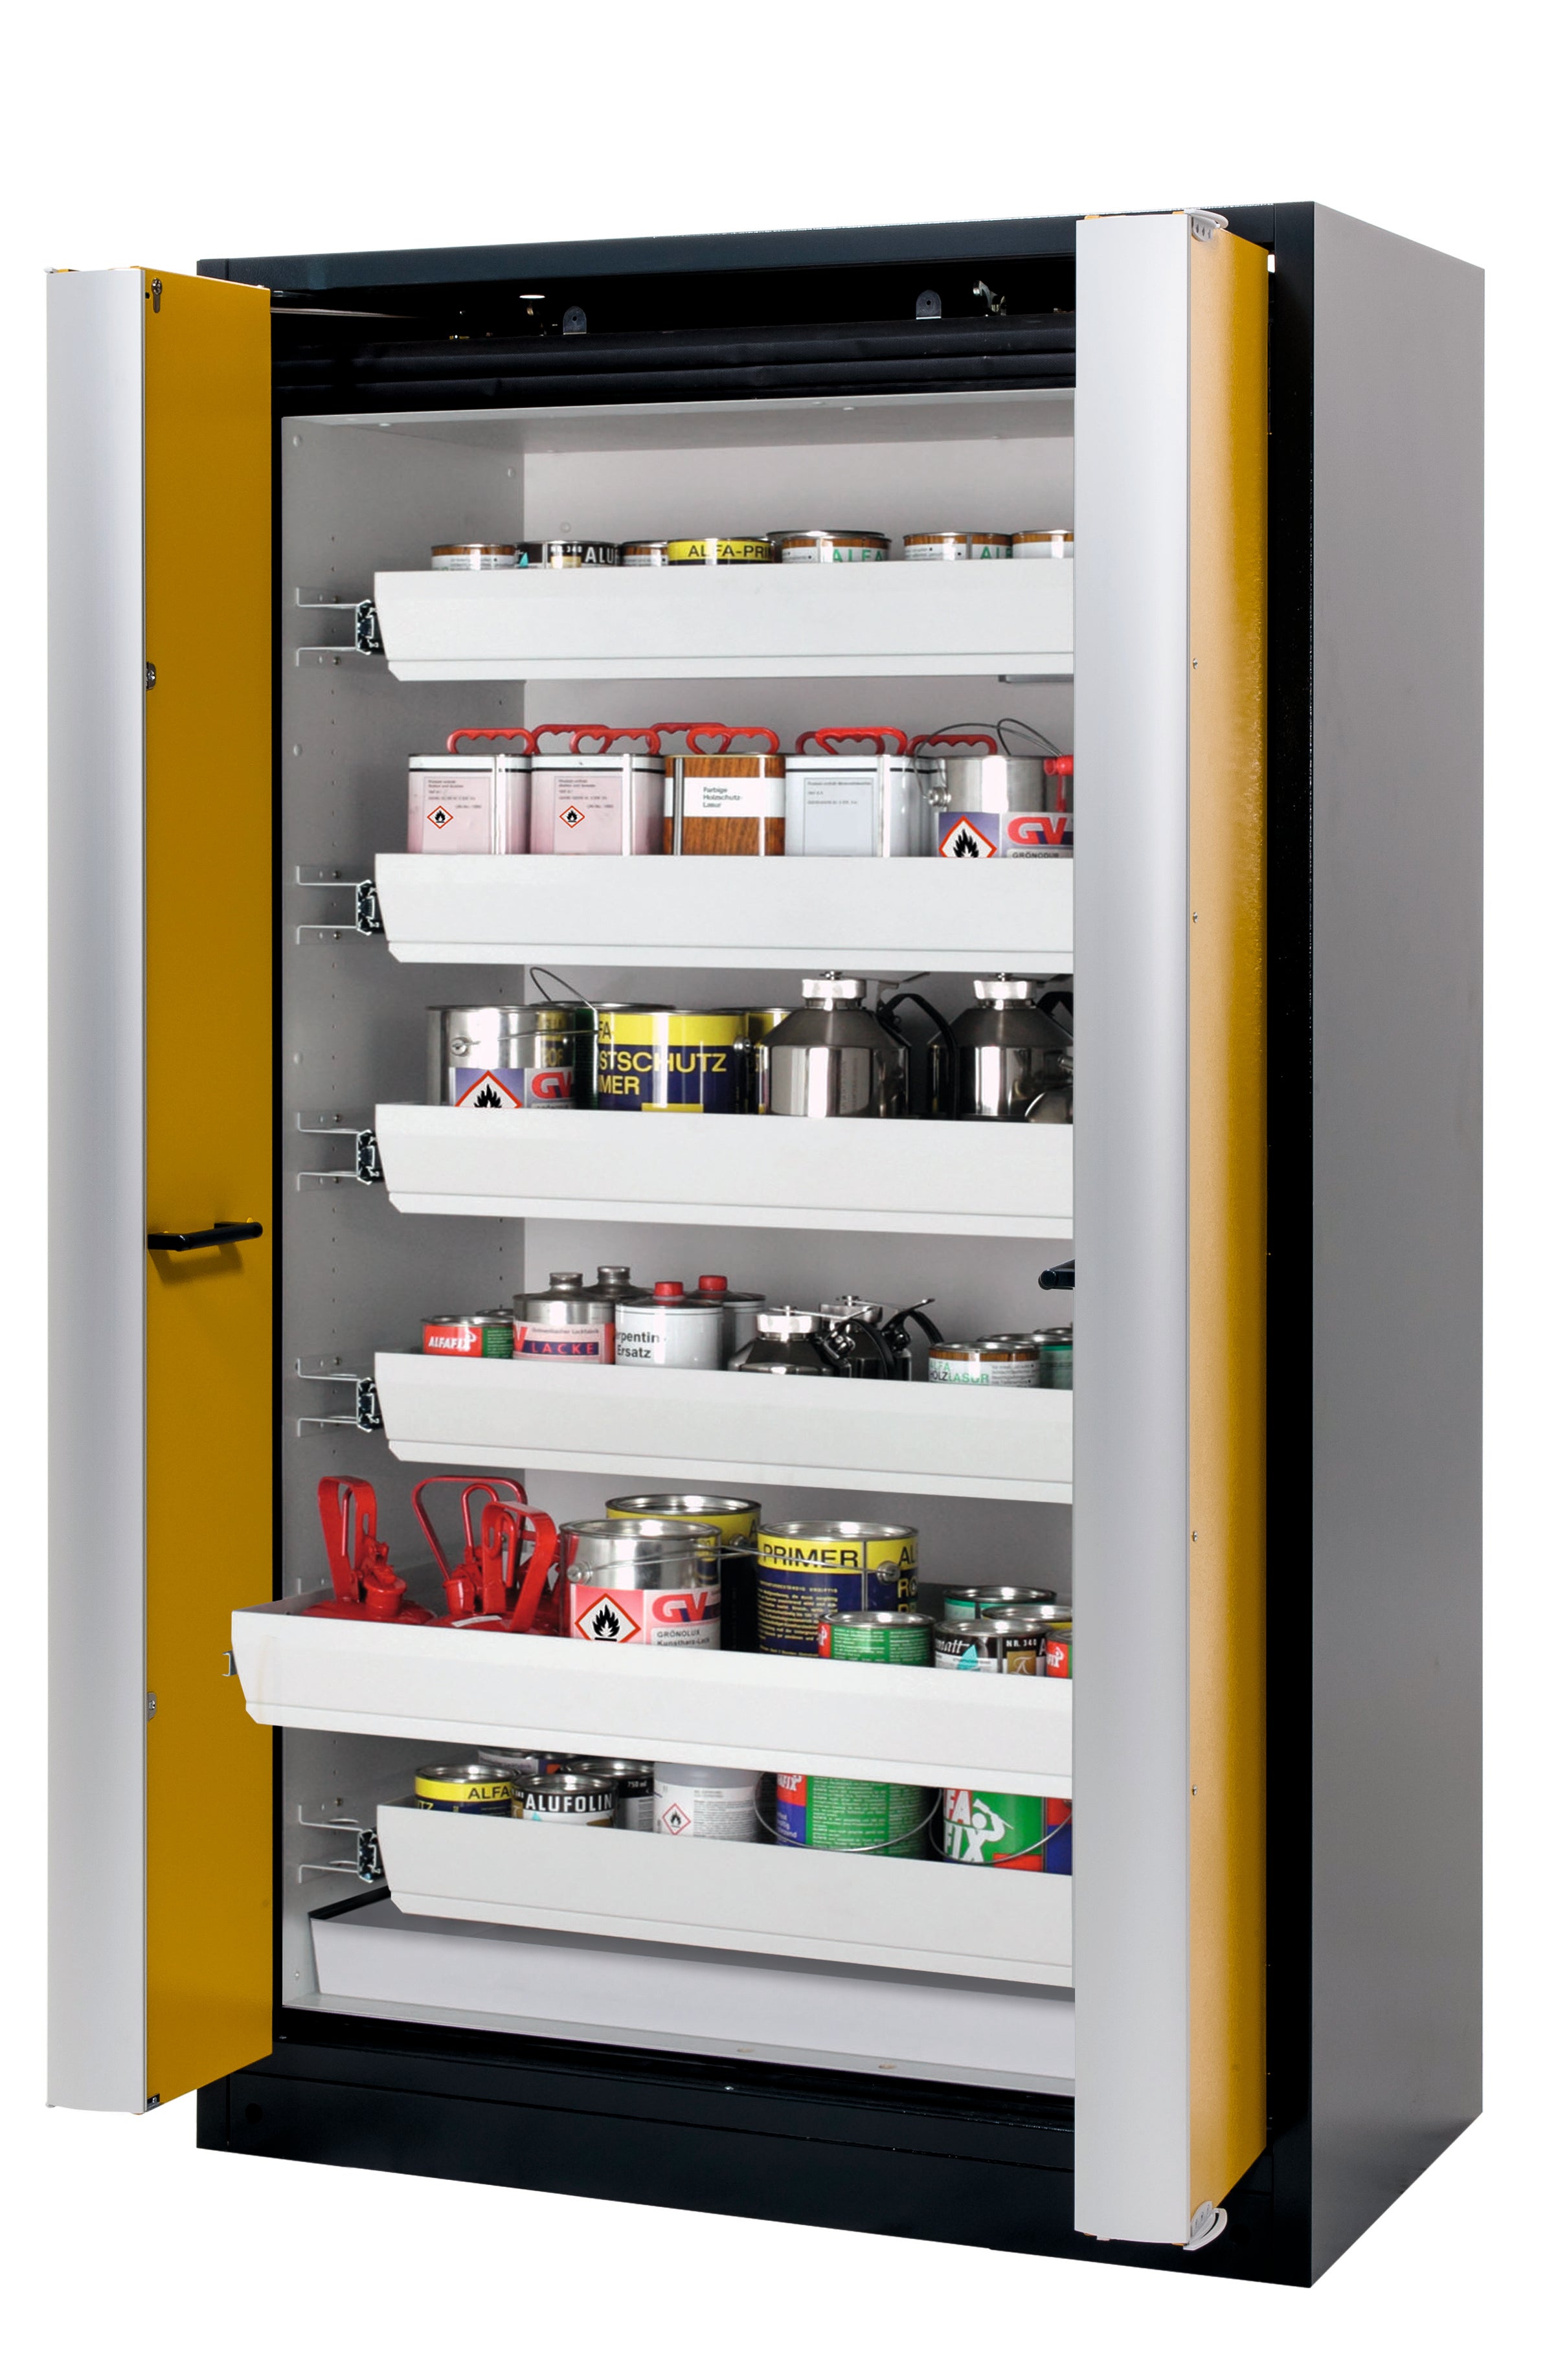 Type 90 safety cabinet Q-PHOENIX-90 model Q90.195.120.FD in safety yellow RAL 1004 with 6x standard pull-out tray (sheet steel)